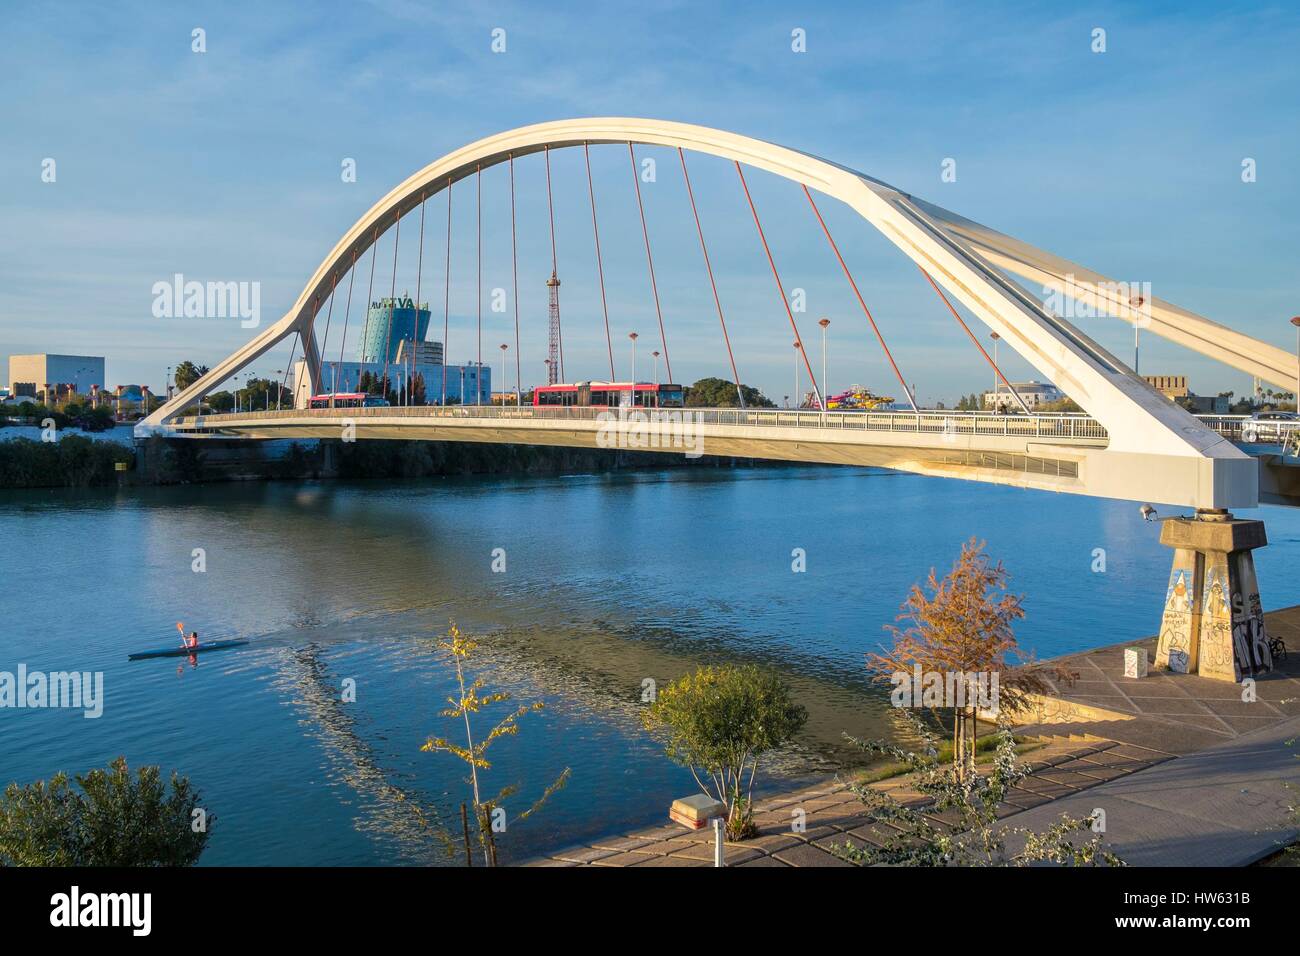 Spain, Andalusia, Seville, Guadalquivir basin and Barqueta Bridge built by Juan Jose Arenas and Marcos J. Pantaleon for the 1992 exhibition in the background, Isla de la Cartuja. Stock Photo